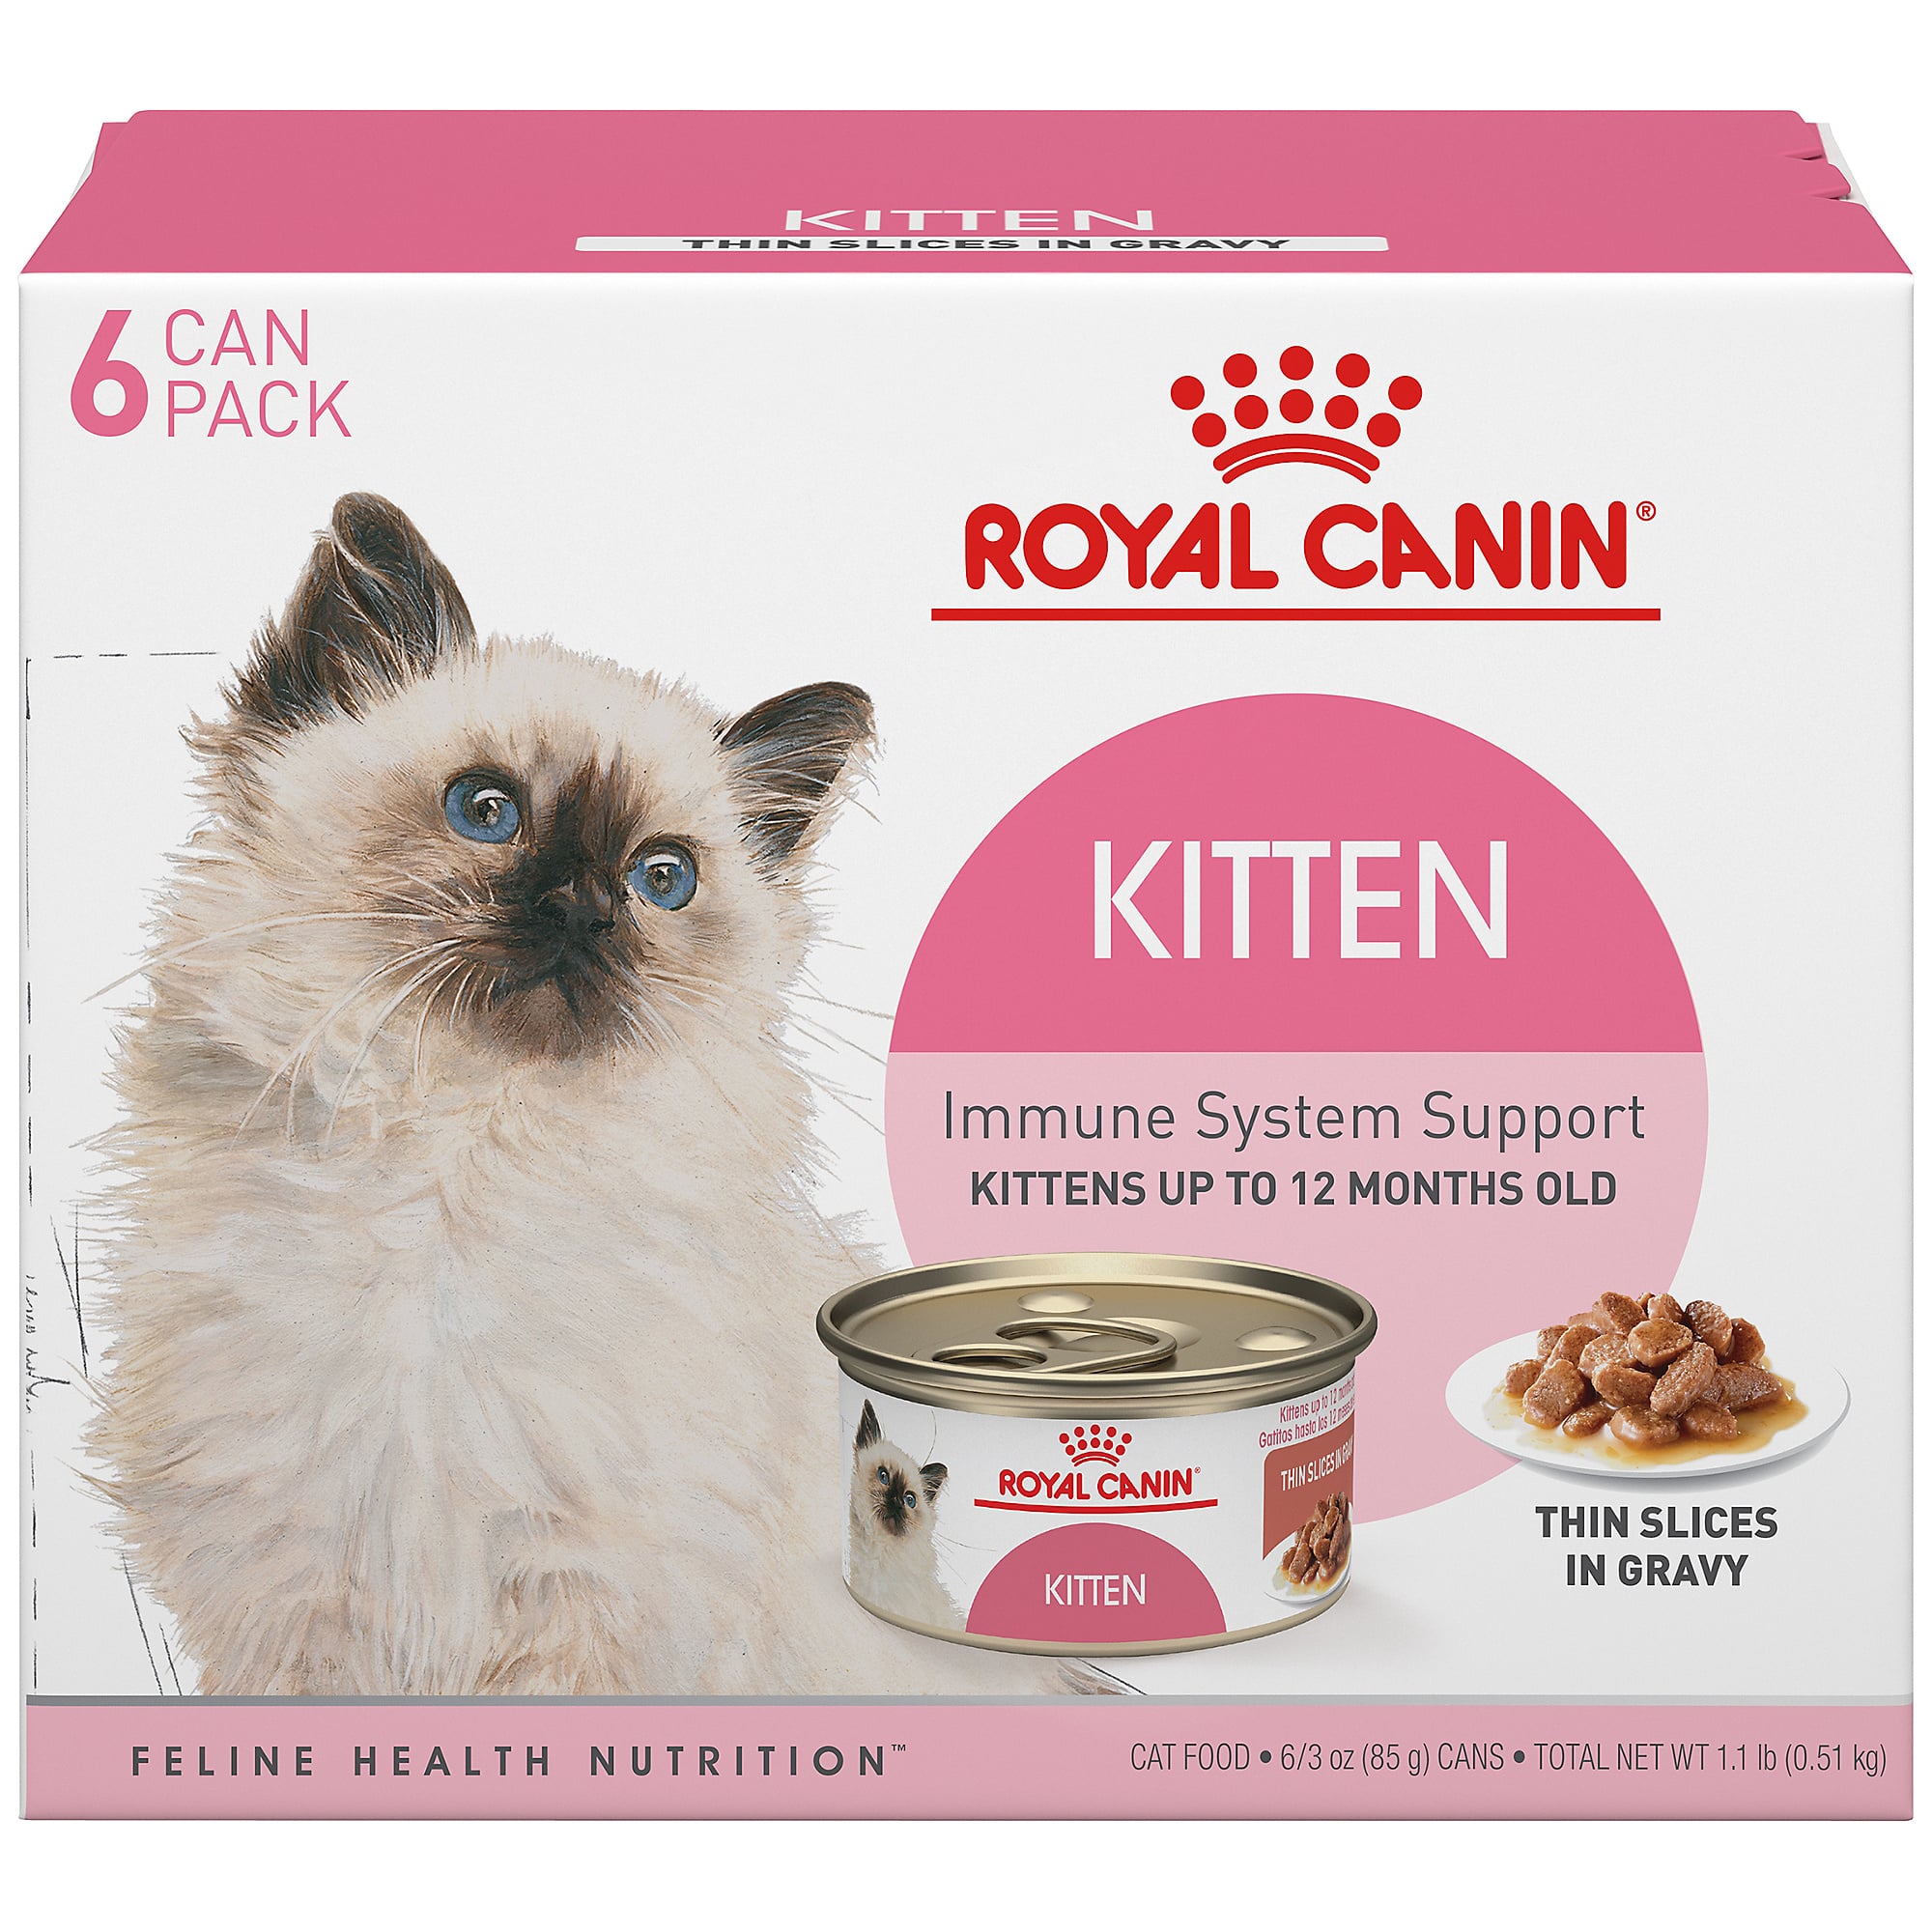 Kitten Thin Slices in Gravy Canned Cat Food